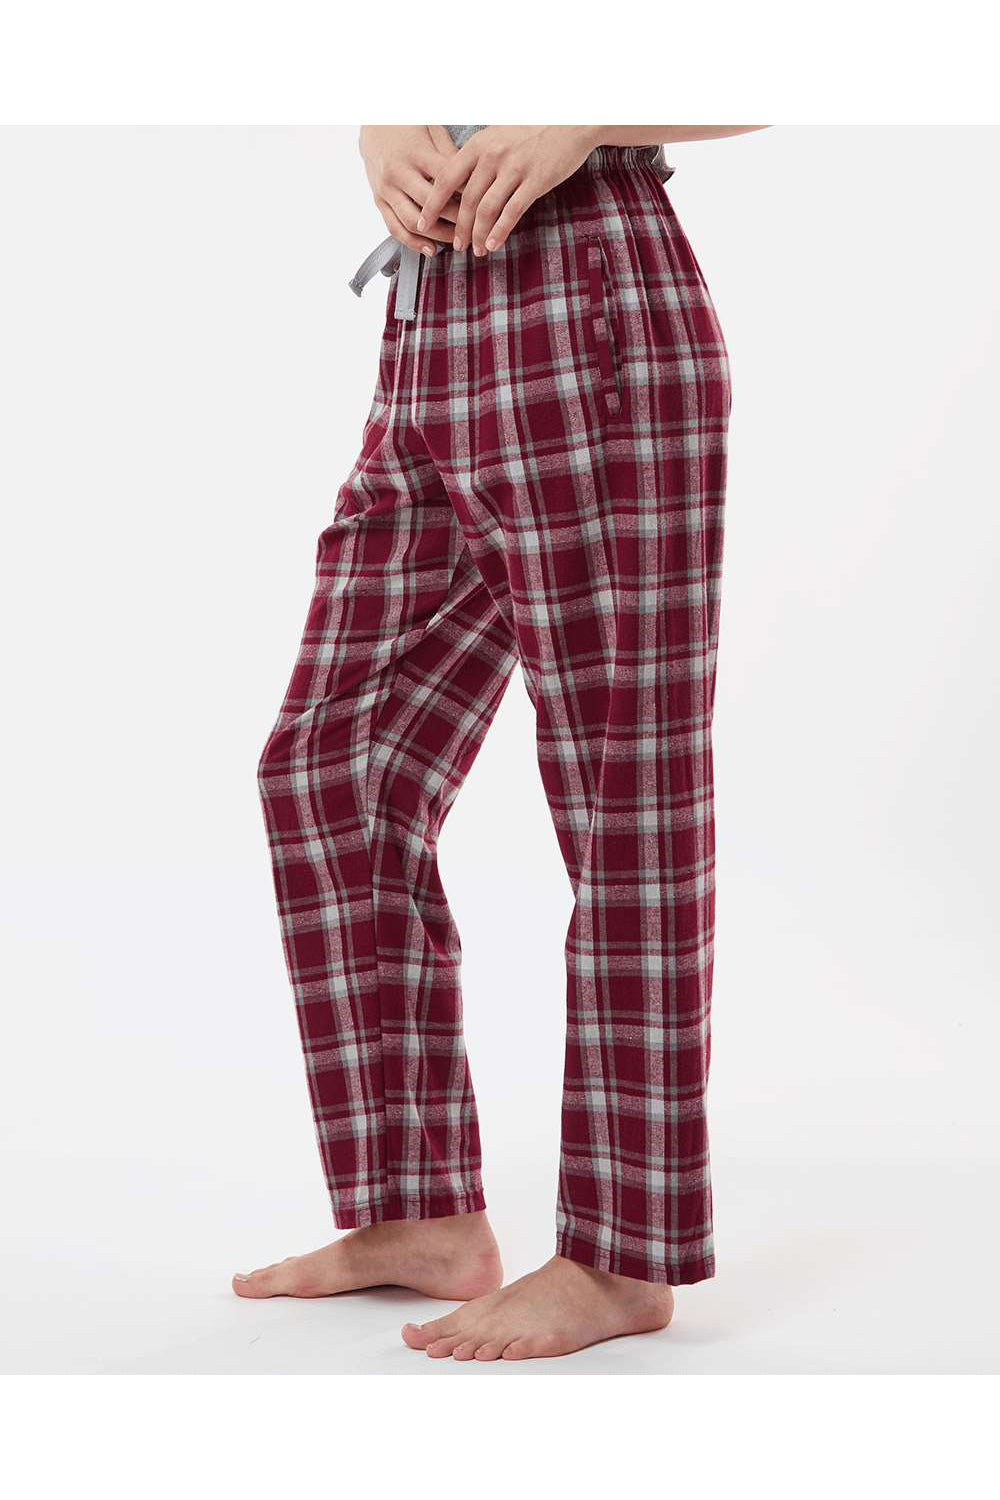 Boxercraft BW6620 Womens Haley Flannel Pants Heritage Maroon Plaid Model Side